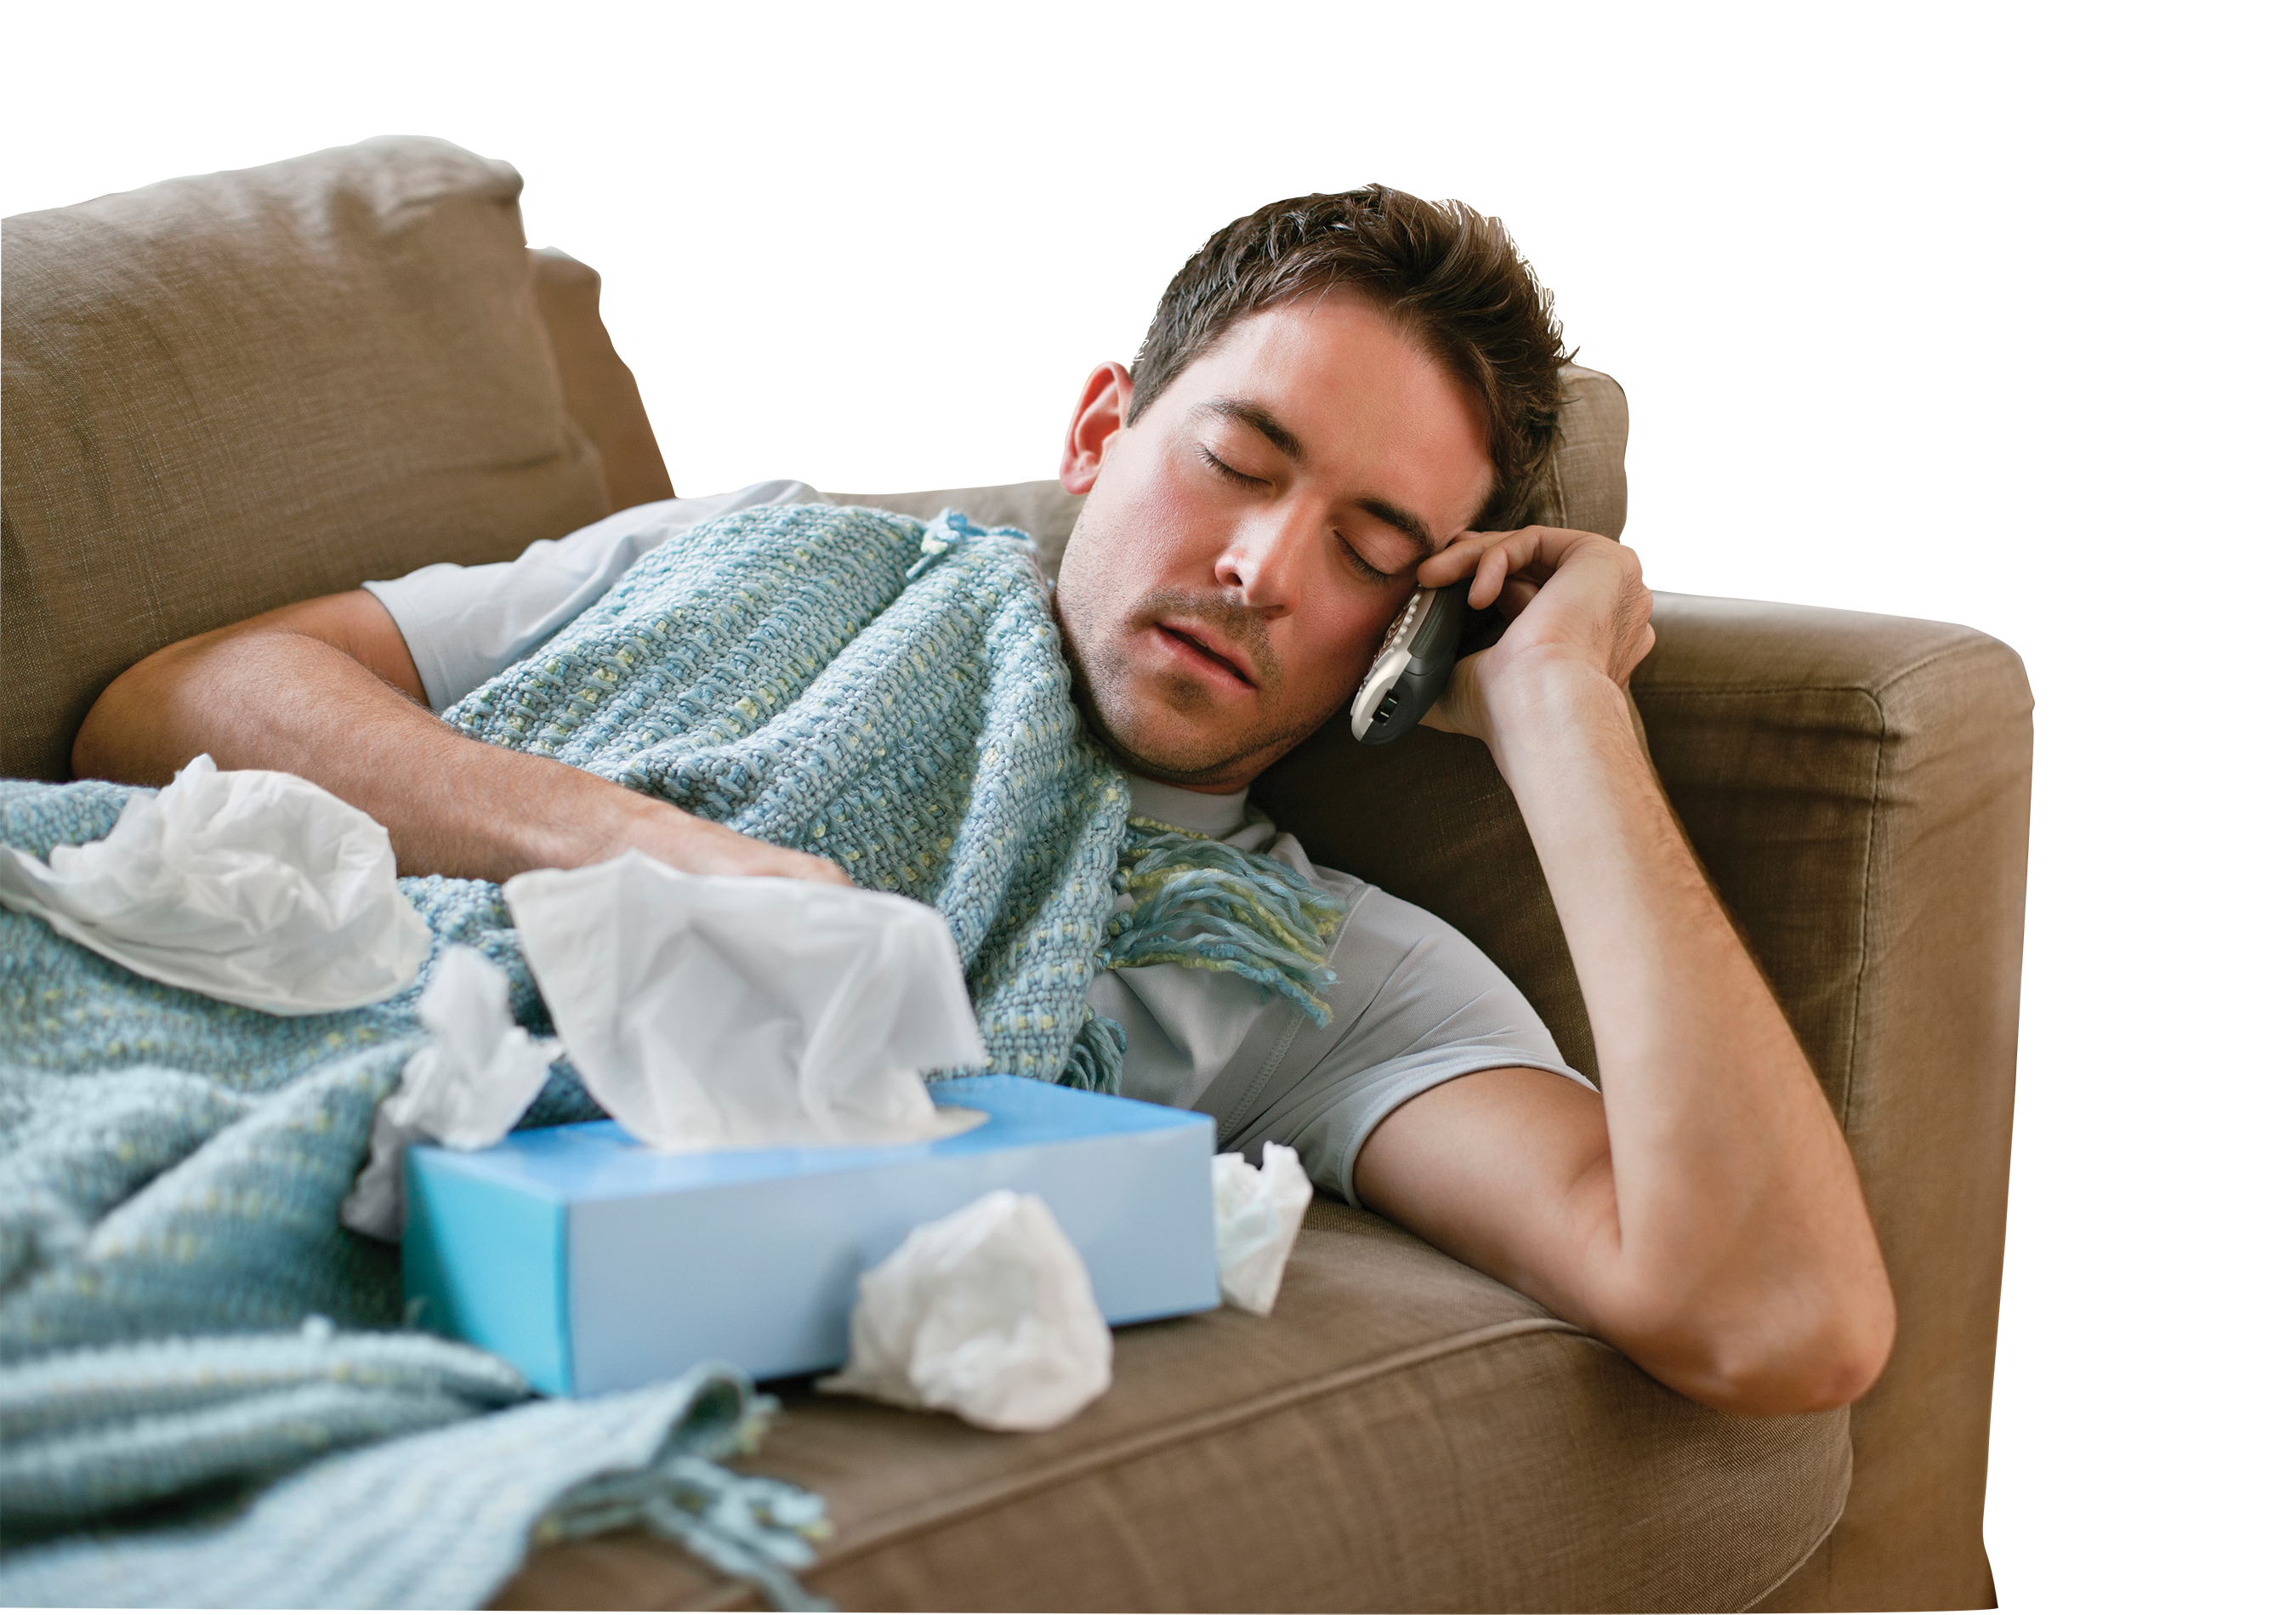 Man calling in sick to work